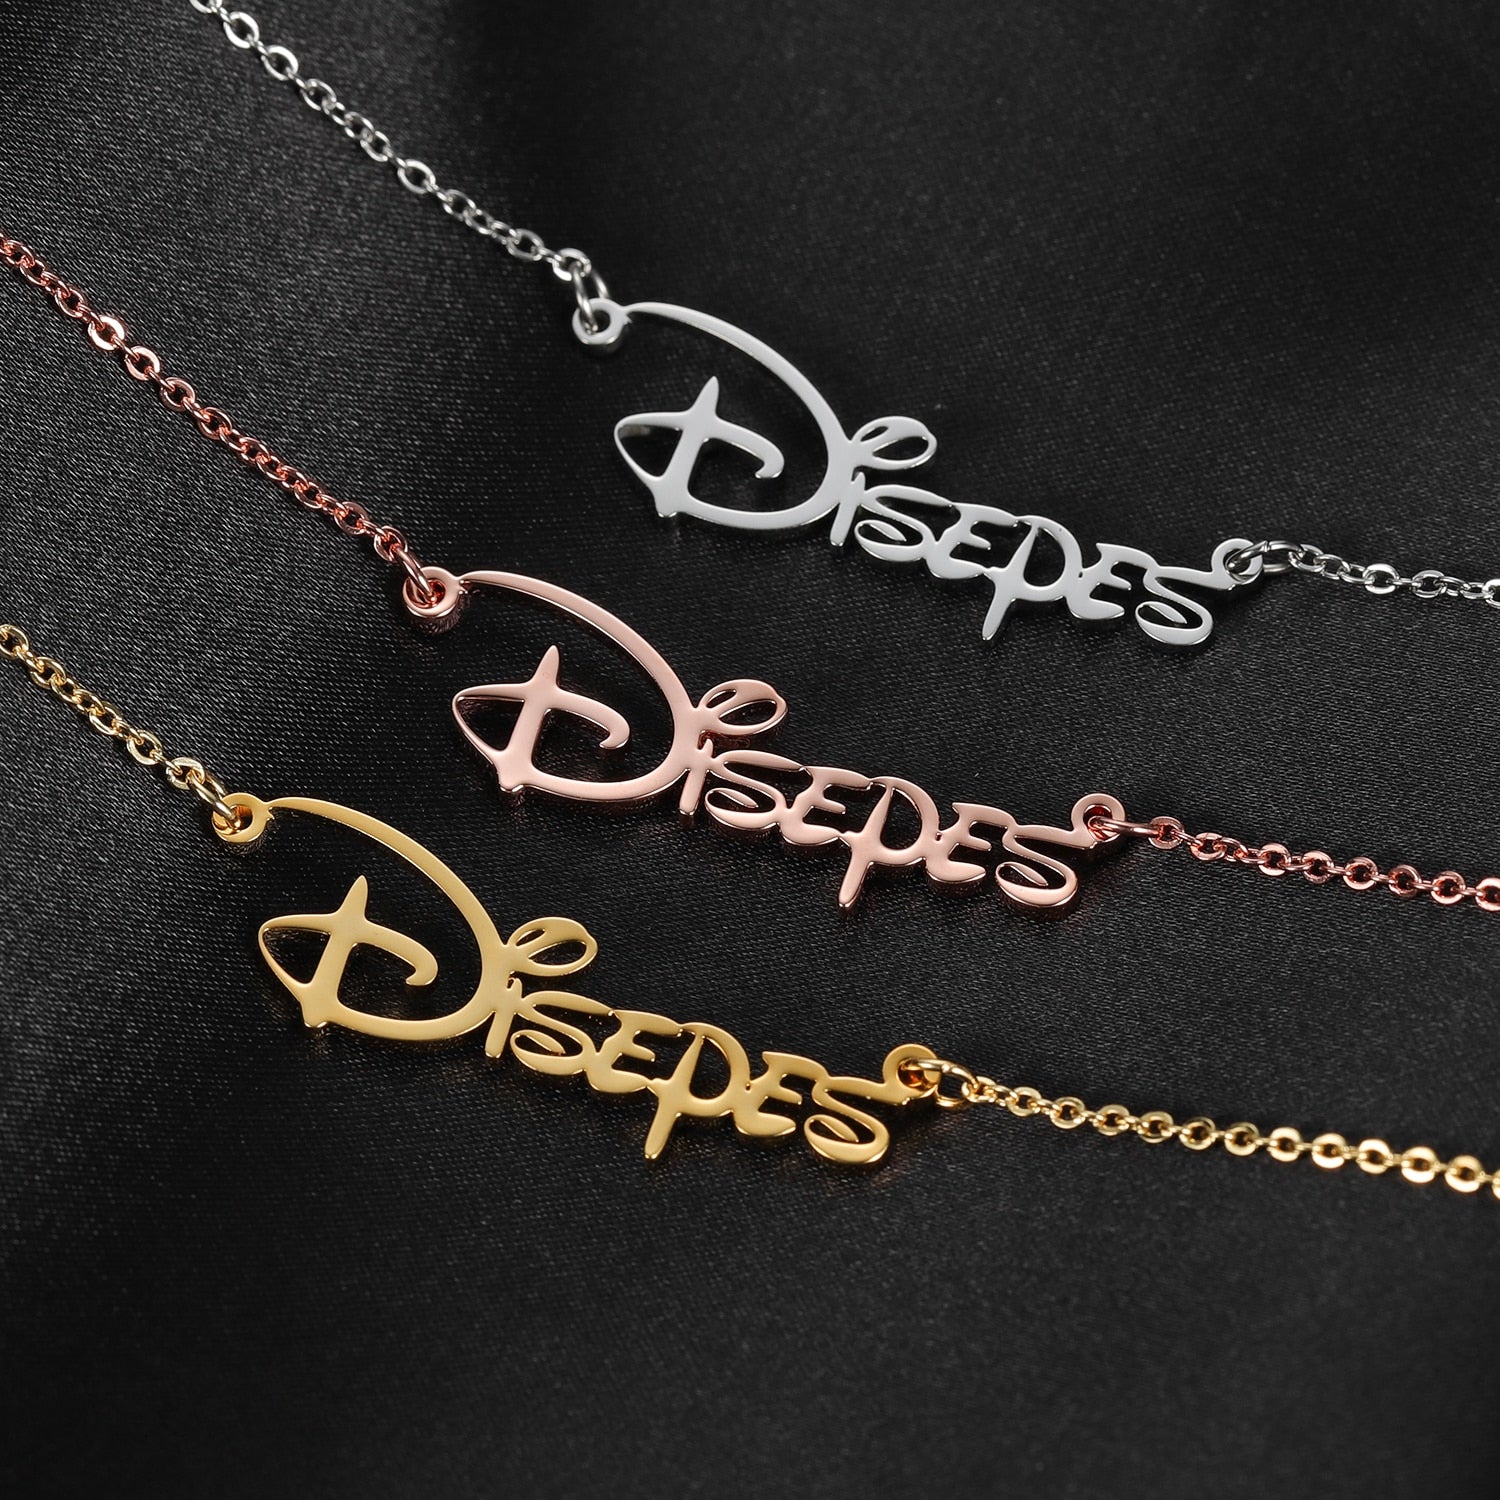 Personalized Disney Necklace